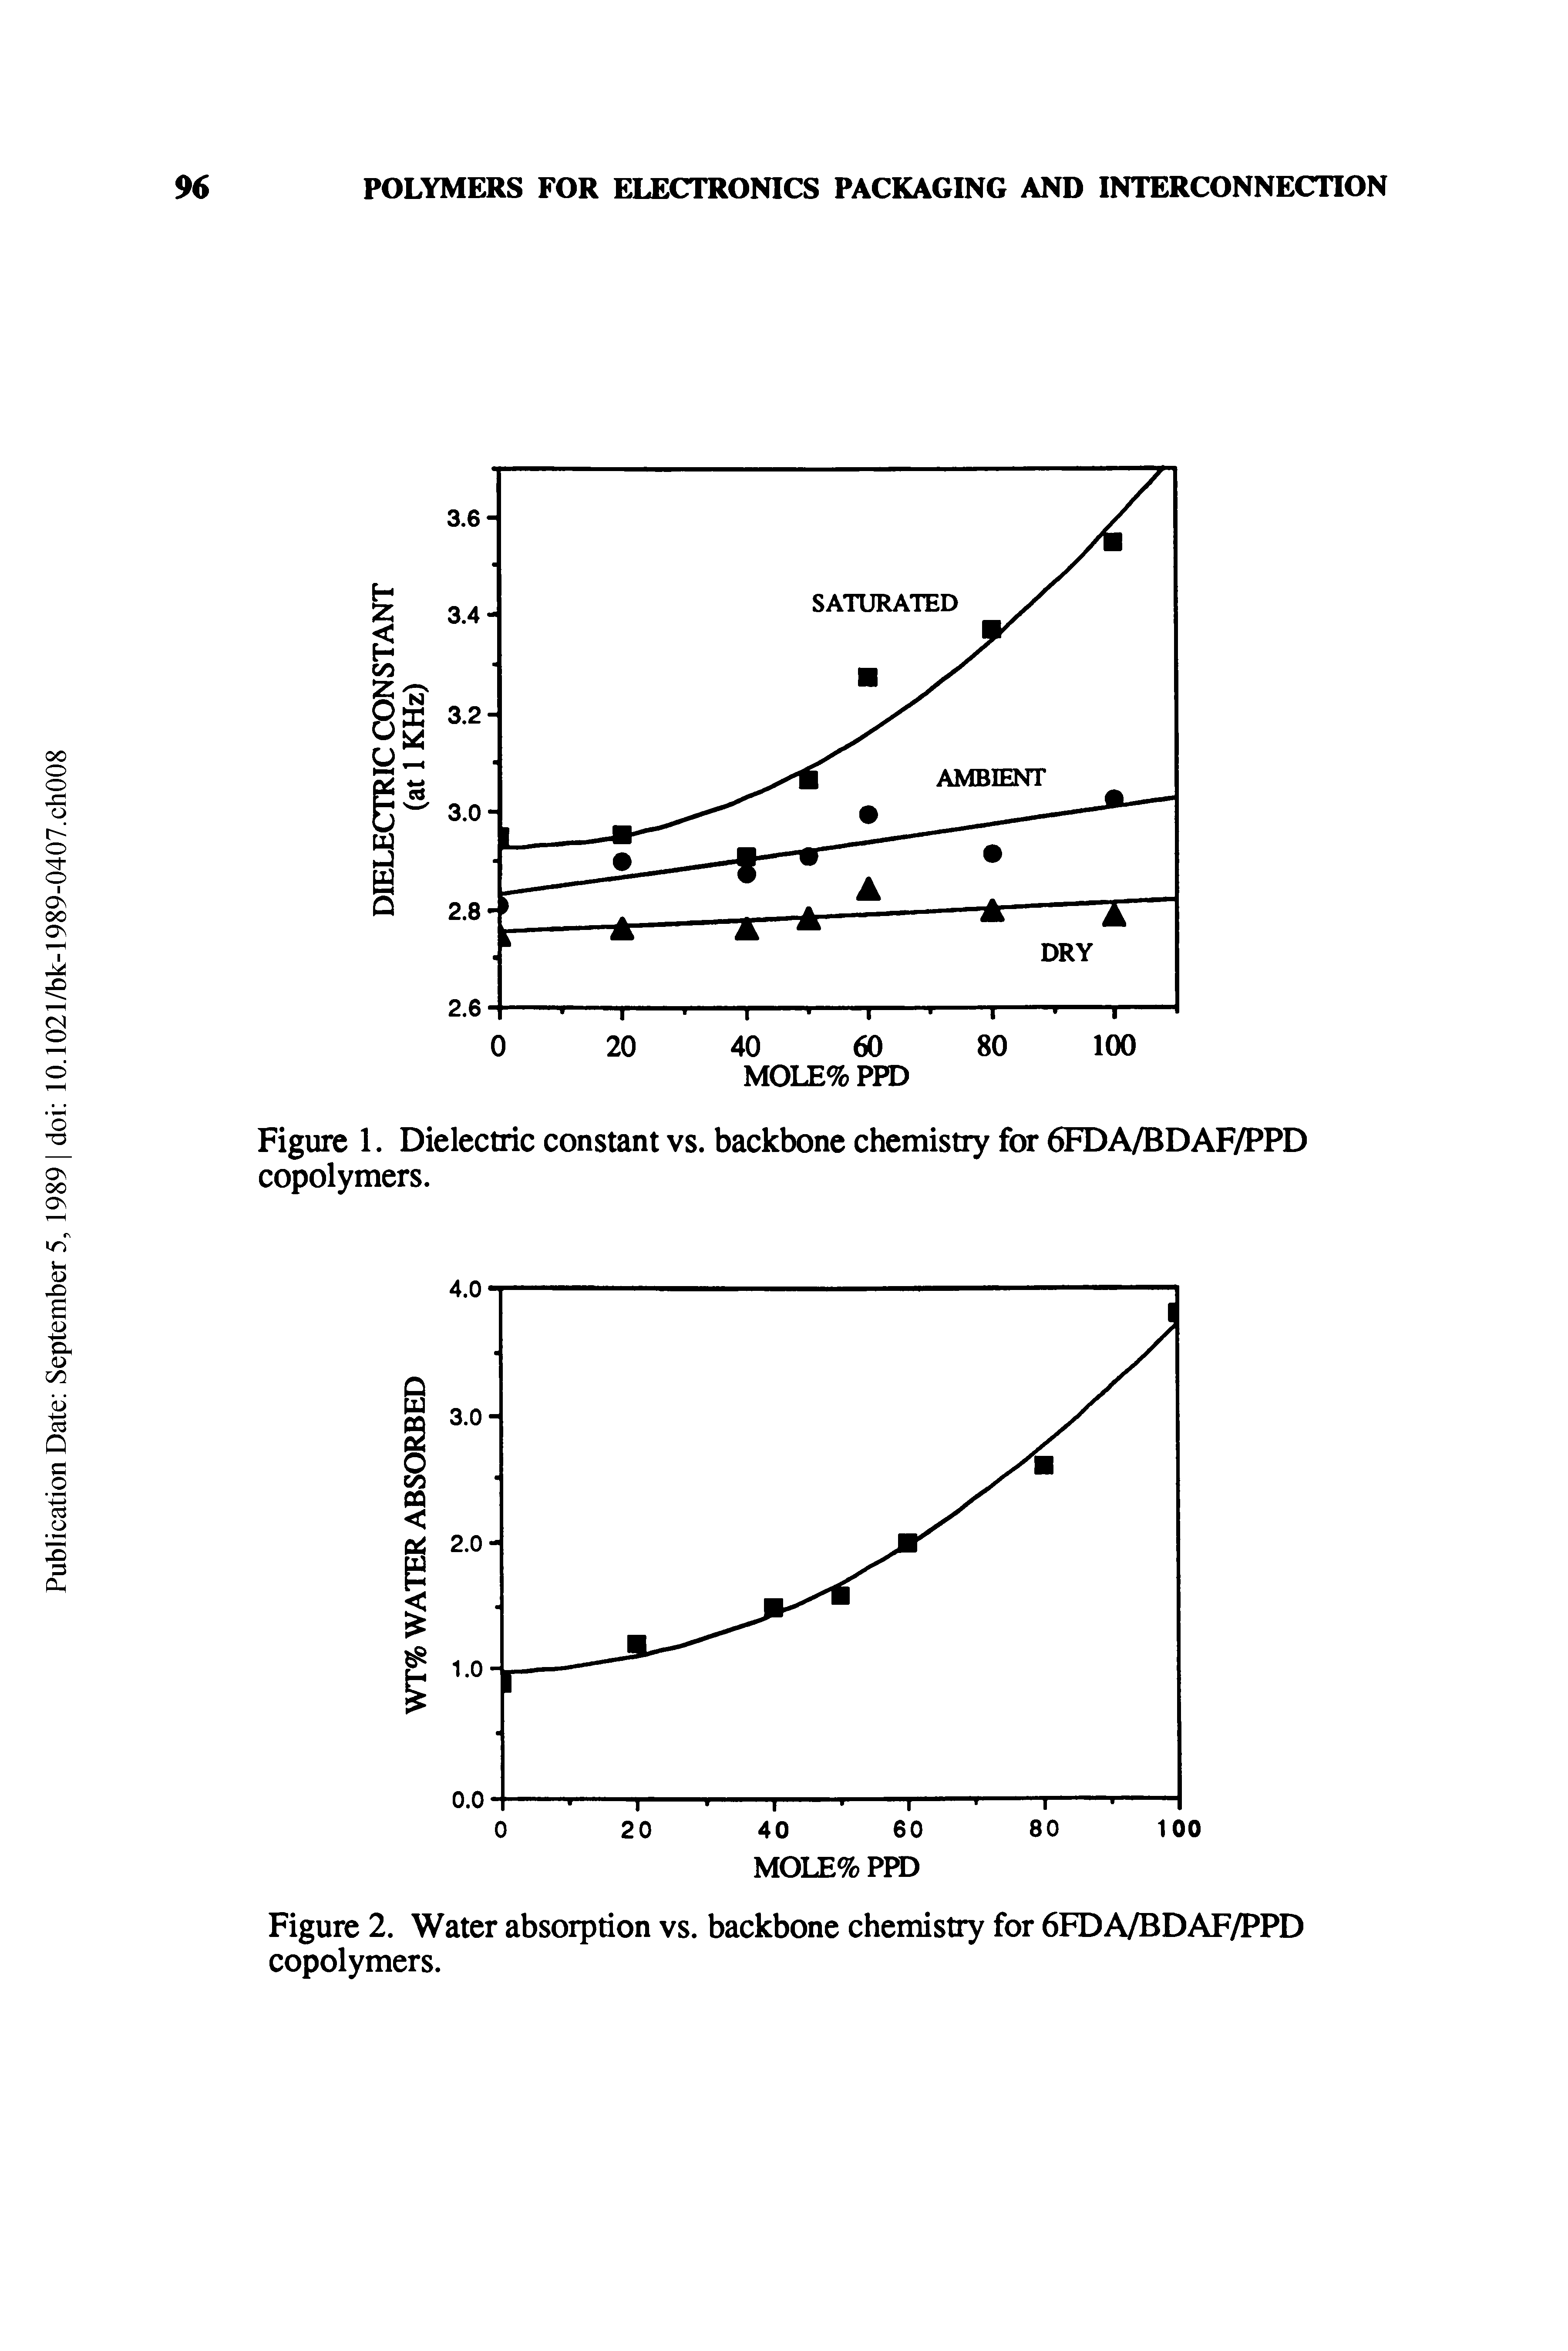 Figure 1. Dielectric constant vs. backbone chemistry for 6FDA/BDAF/PPD copolymers.